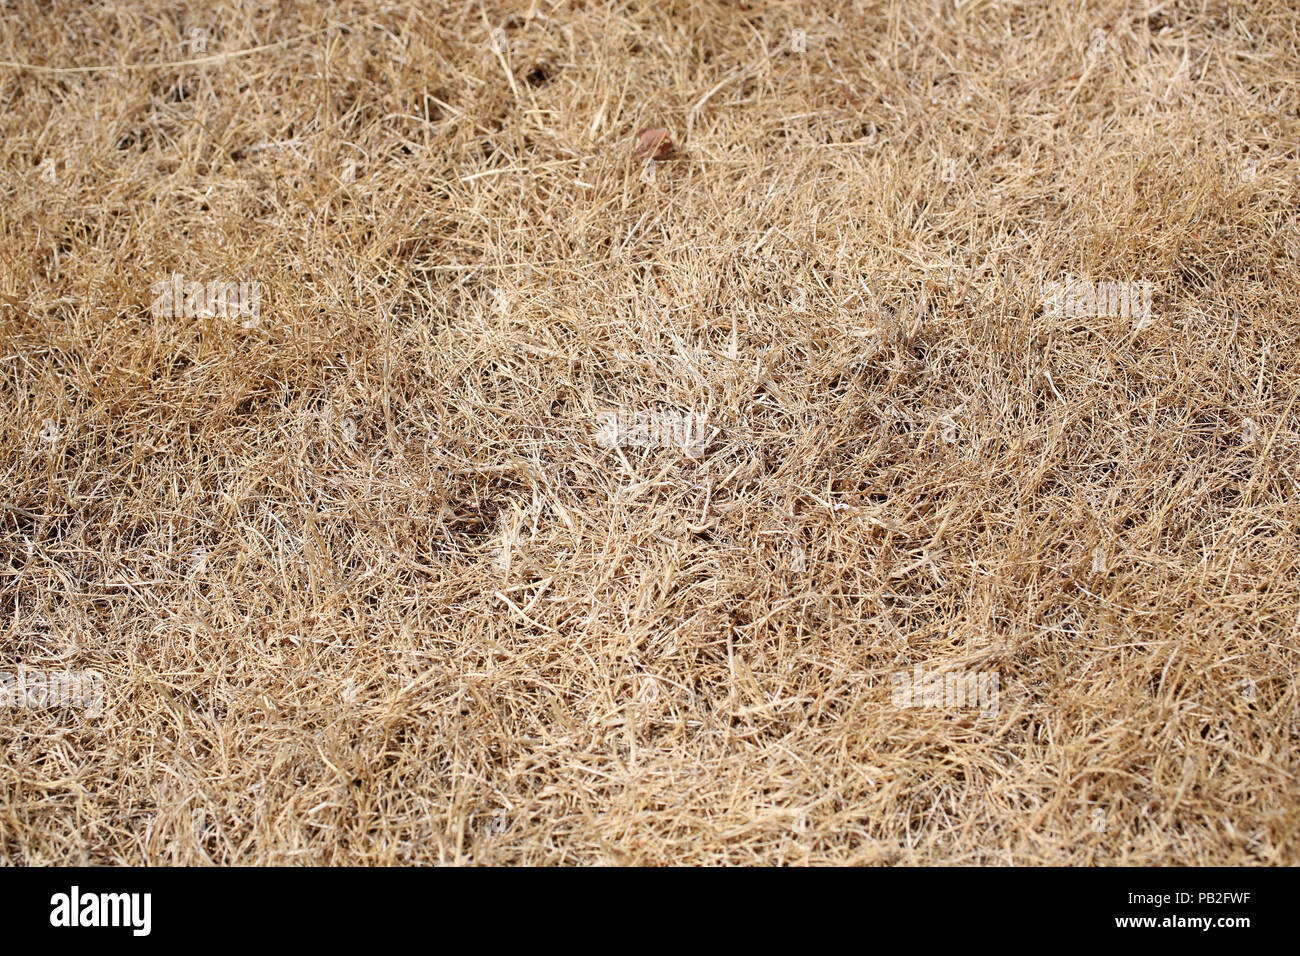 Dead grass burnt yellow by the sun pictured in Chichester, West Sussex, UK. Stock Photo